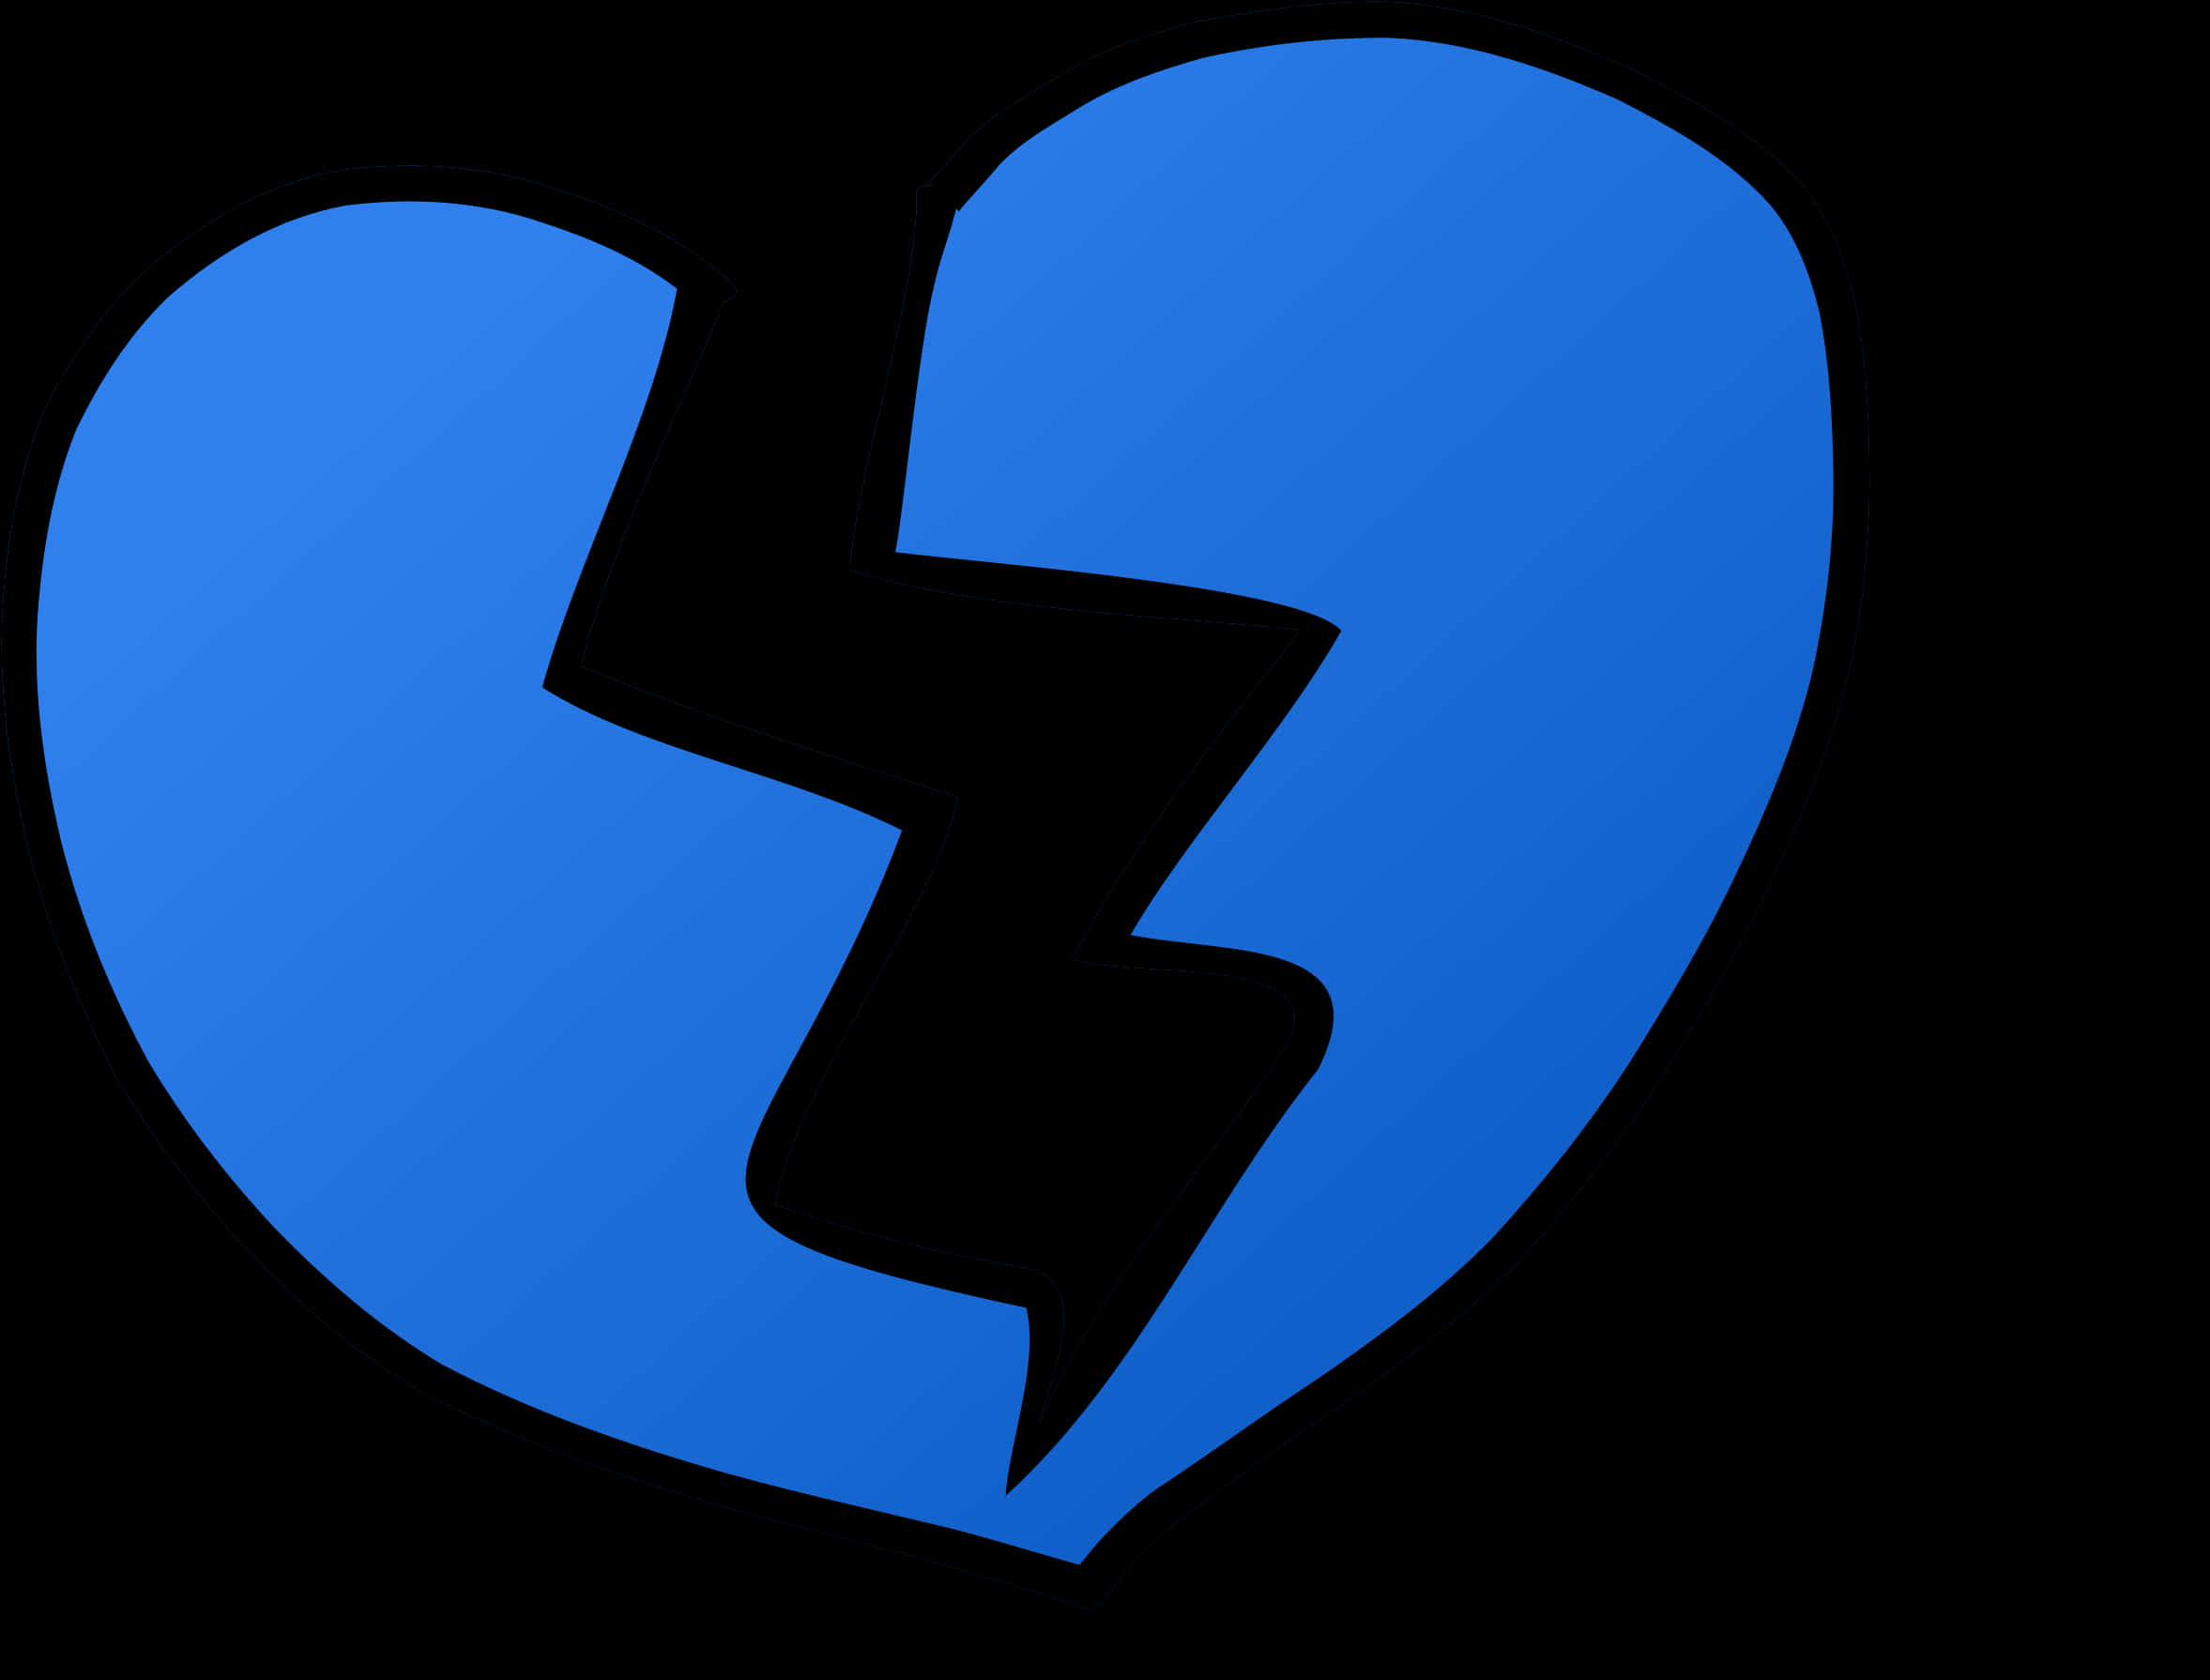 A Blue Broken Heart With Black Background